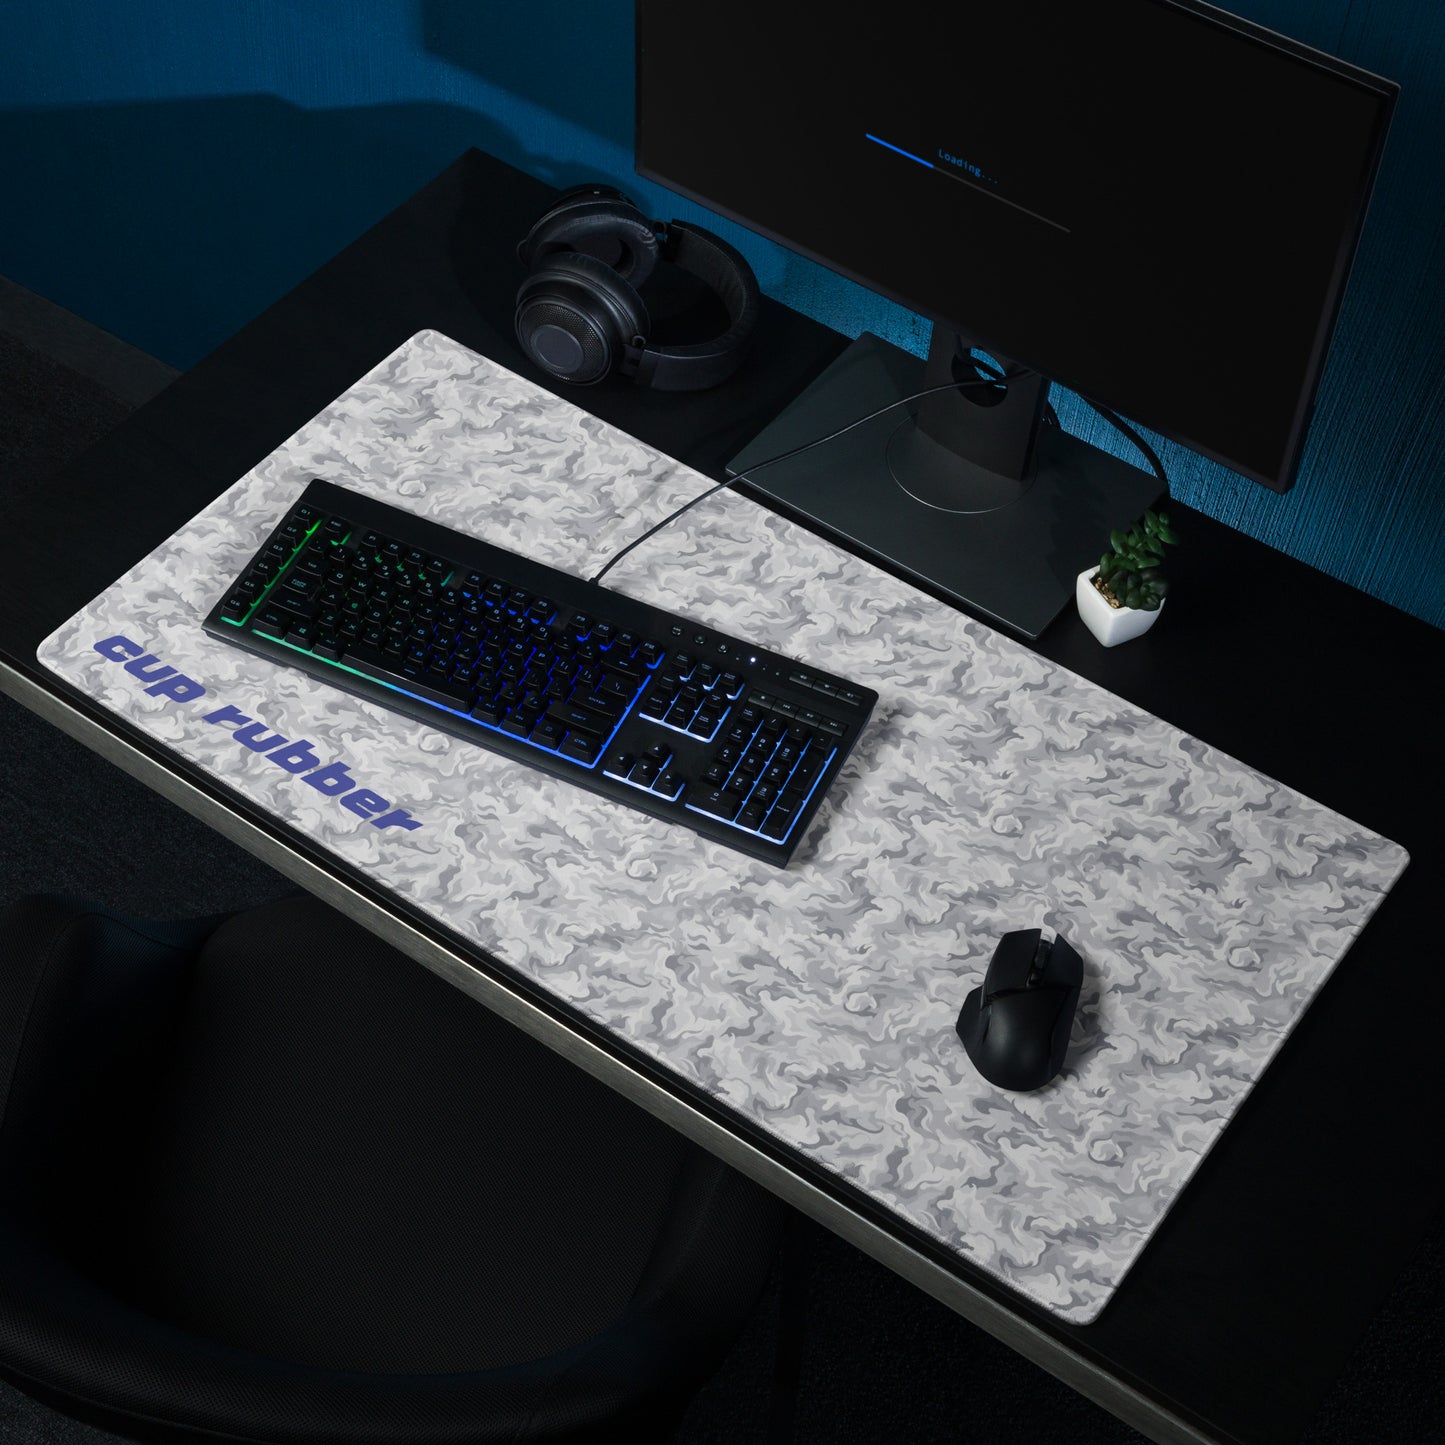 A 36" x 18" desk pad with a camo pattern and the word "Cup Rubber" on it in the bottom left corner shown on a desk setup. Beige and White in color.